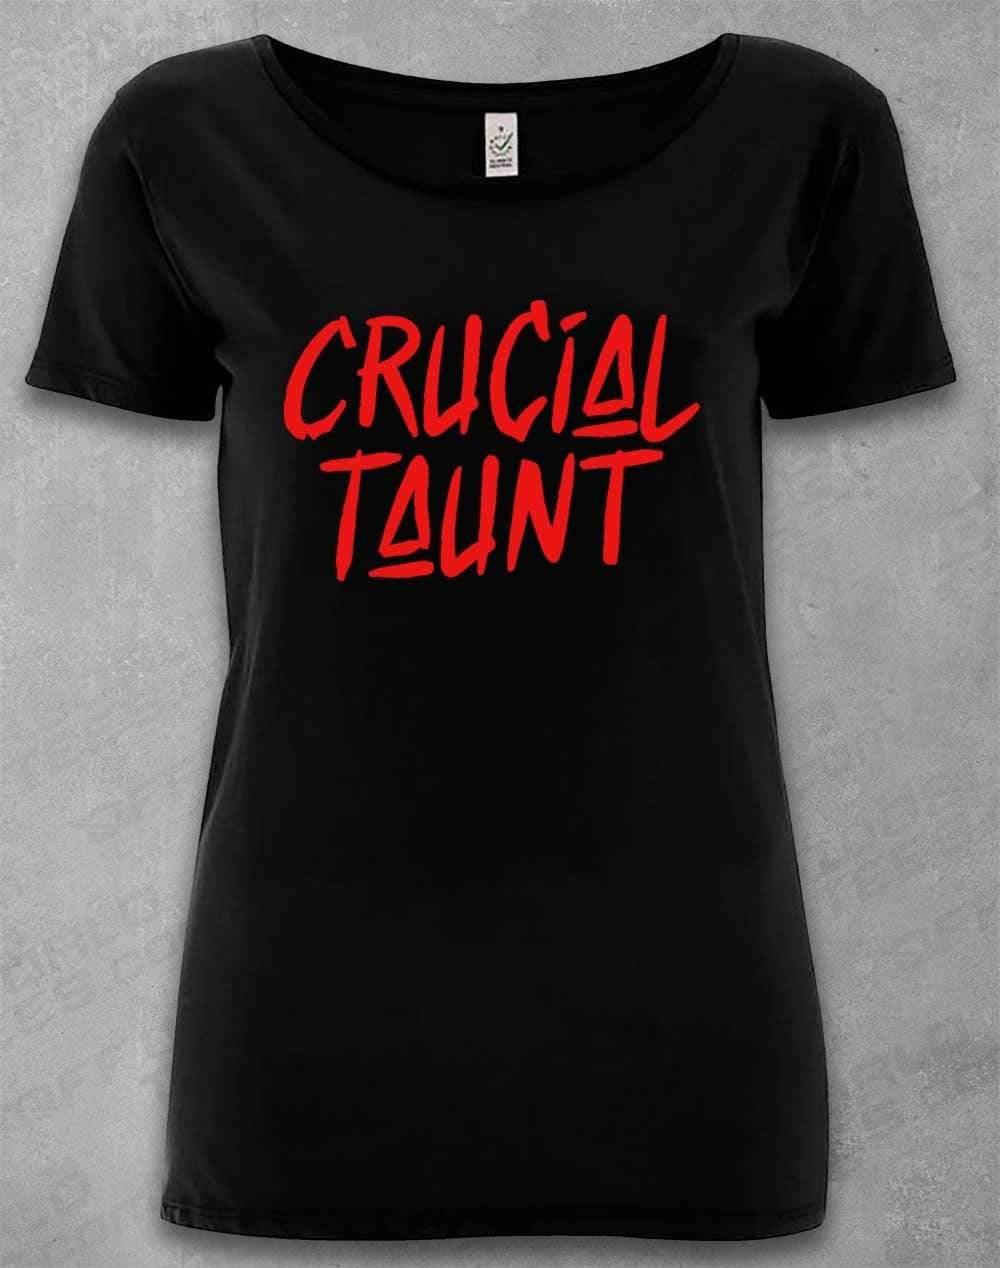 DELUXE Crucial Taunt Organic Scoop Neck T-Shirt 8-10 / Black  - Off World Tees